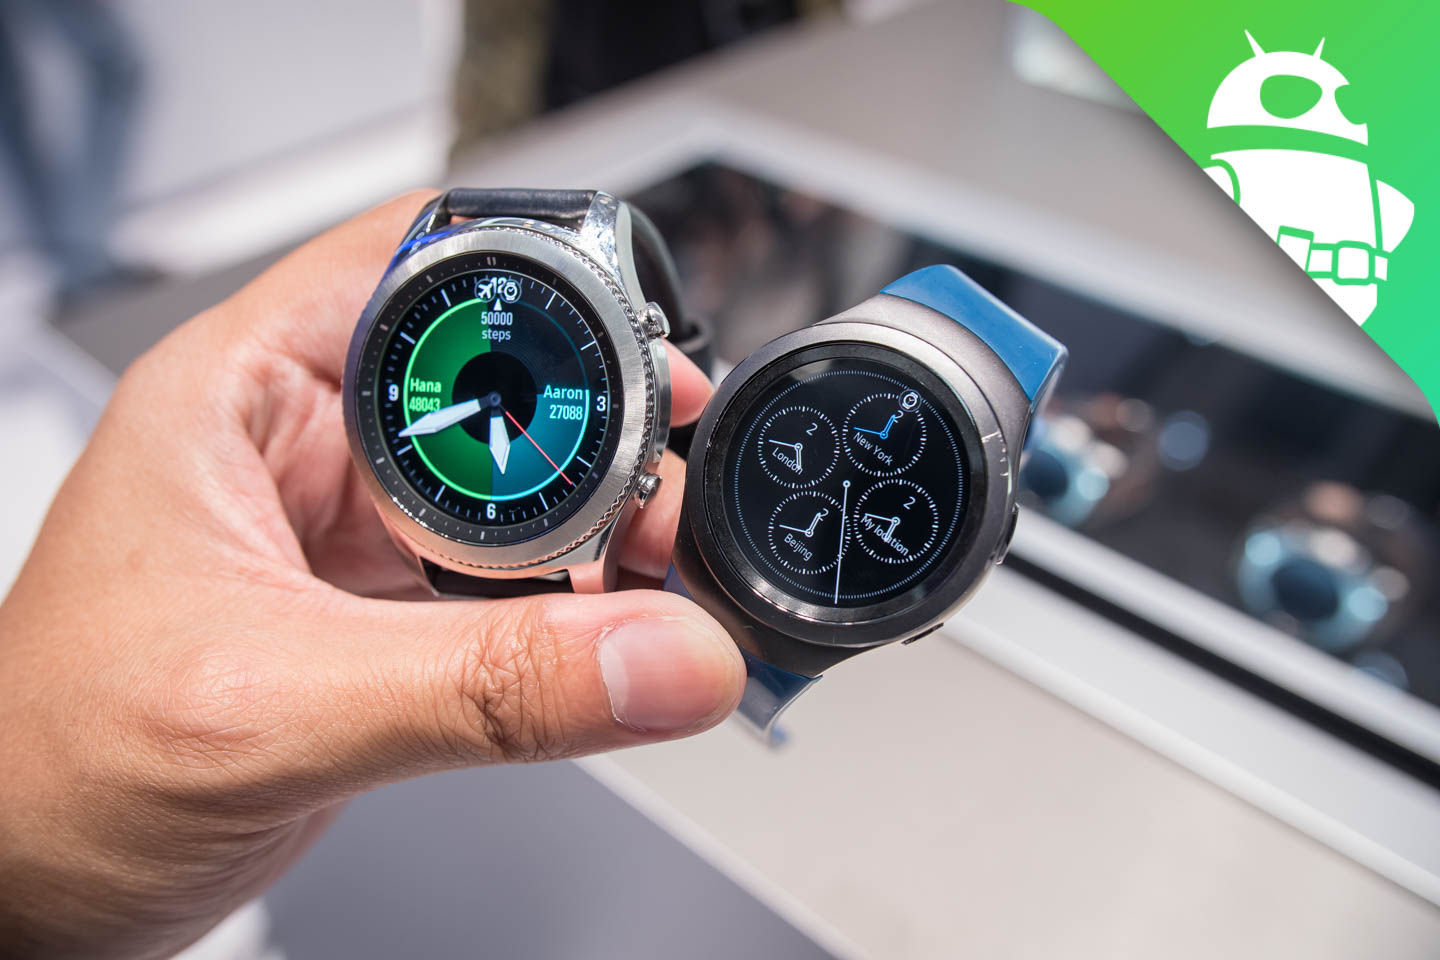 compare samsung gear sport and s3